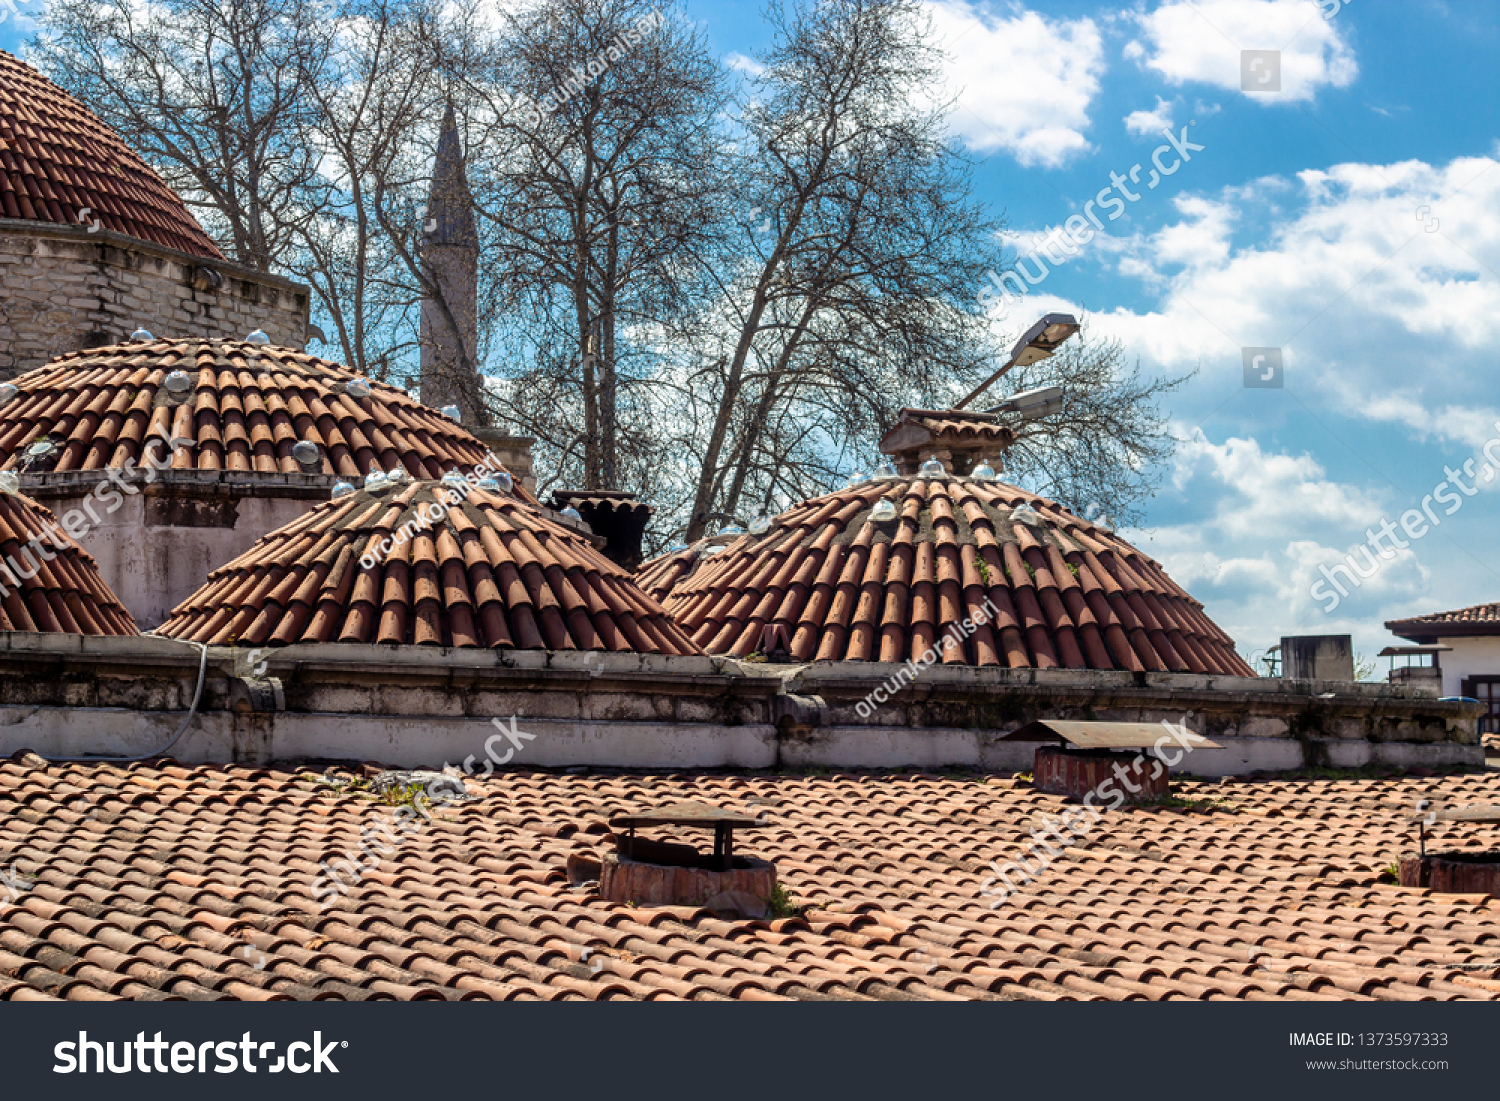 Colorful shoot of old non-well preserved moslem theological school roof in Safranbolu #1373597333